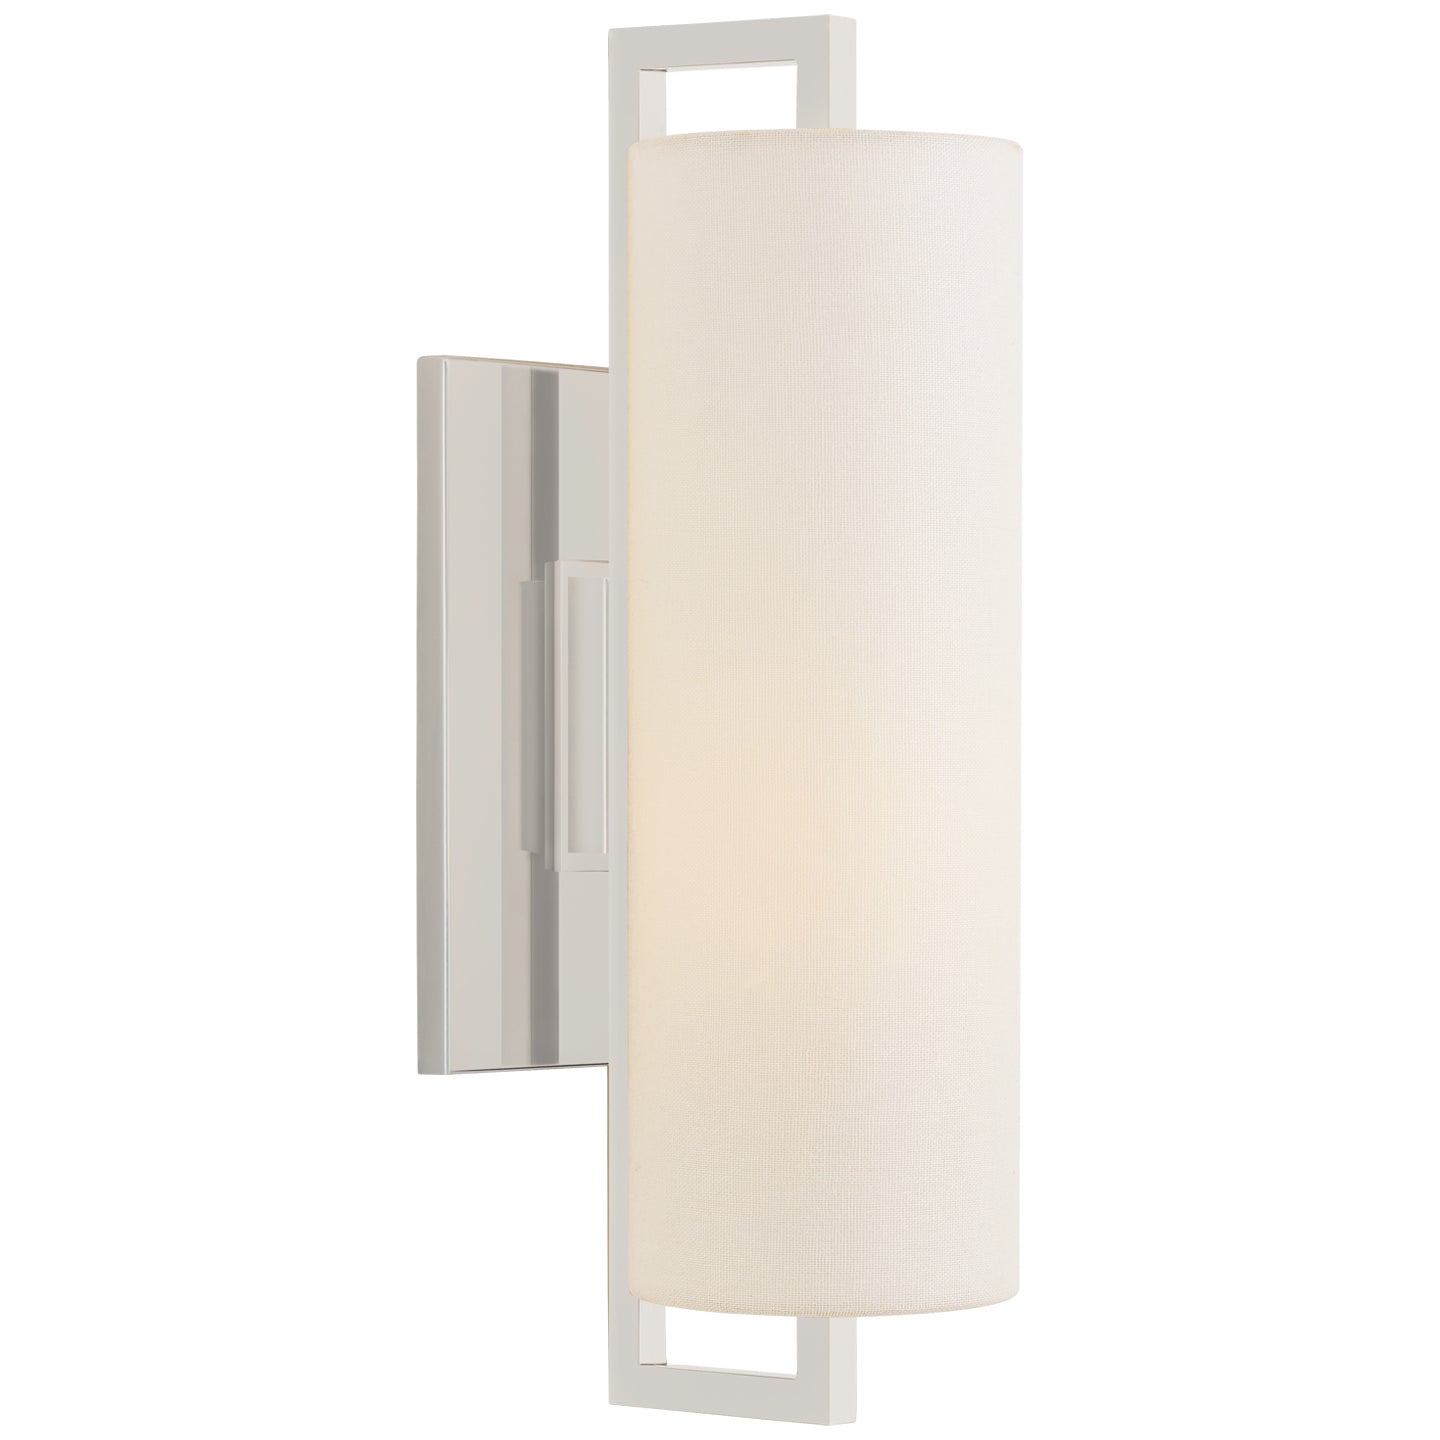 Visual Comfort Signature - S 2520PN-L - LED Wall Sconce - Bowen - Polished Nickel